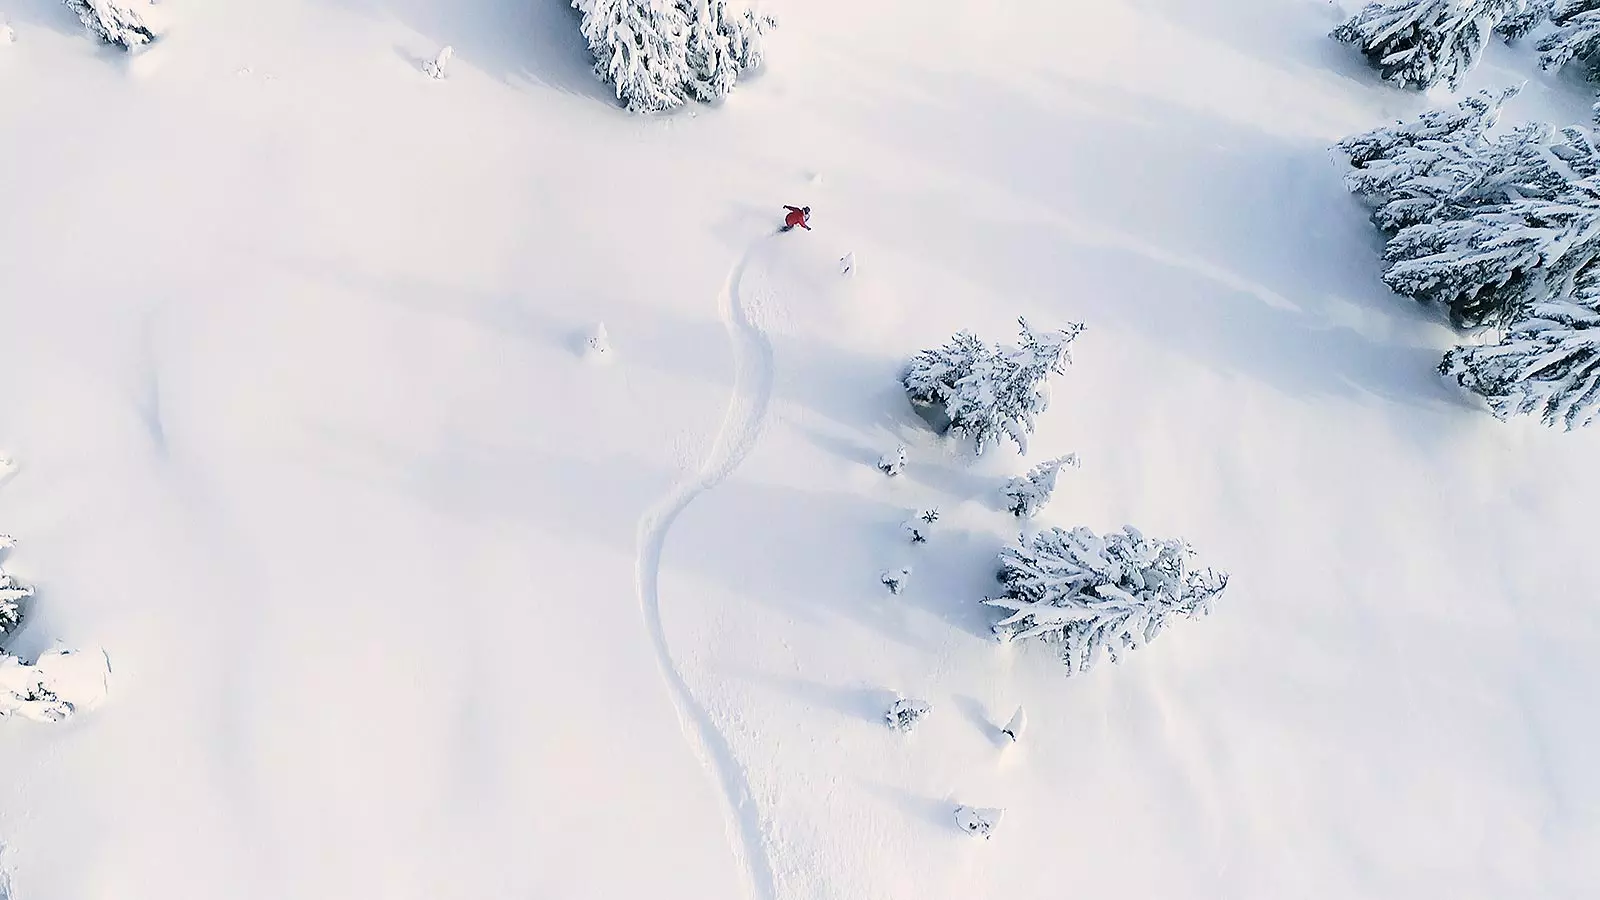 Aerial photograph of a skier off-piste in deep snow